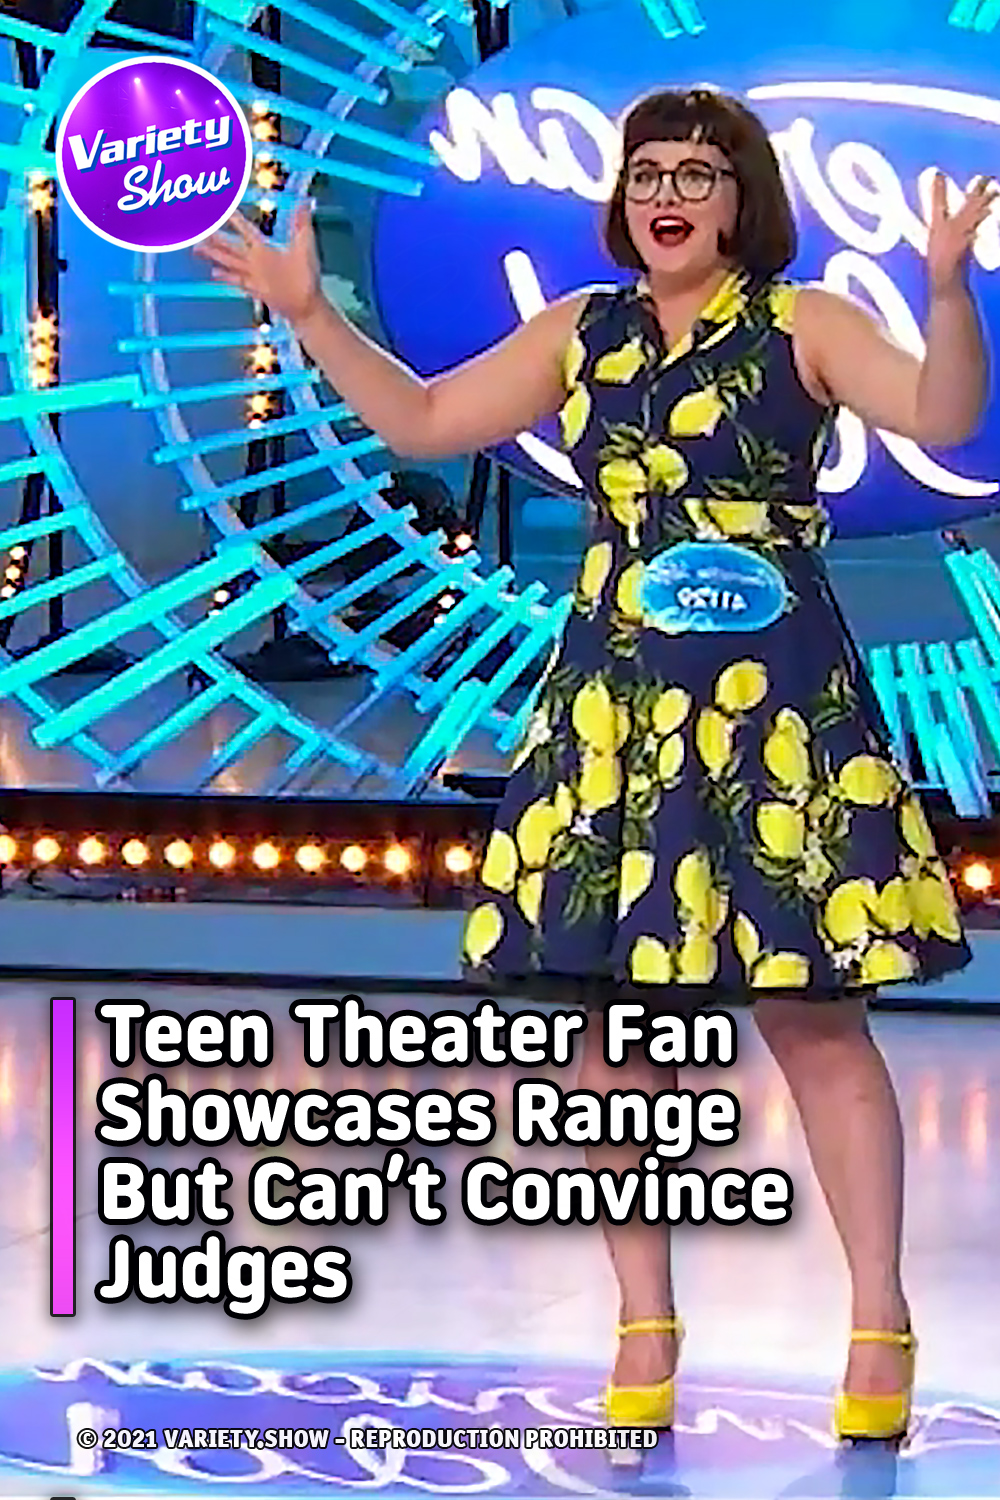 Teen Theater Fan Showcases Range But Can’t Convince Judges